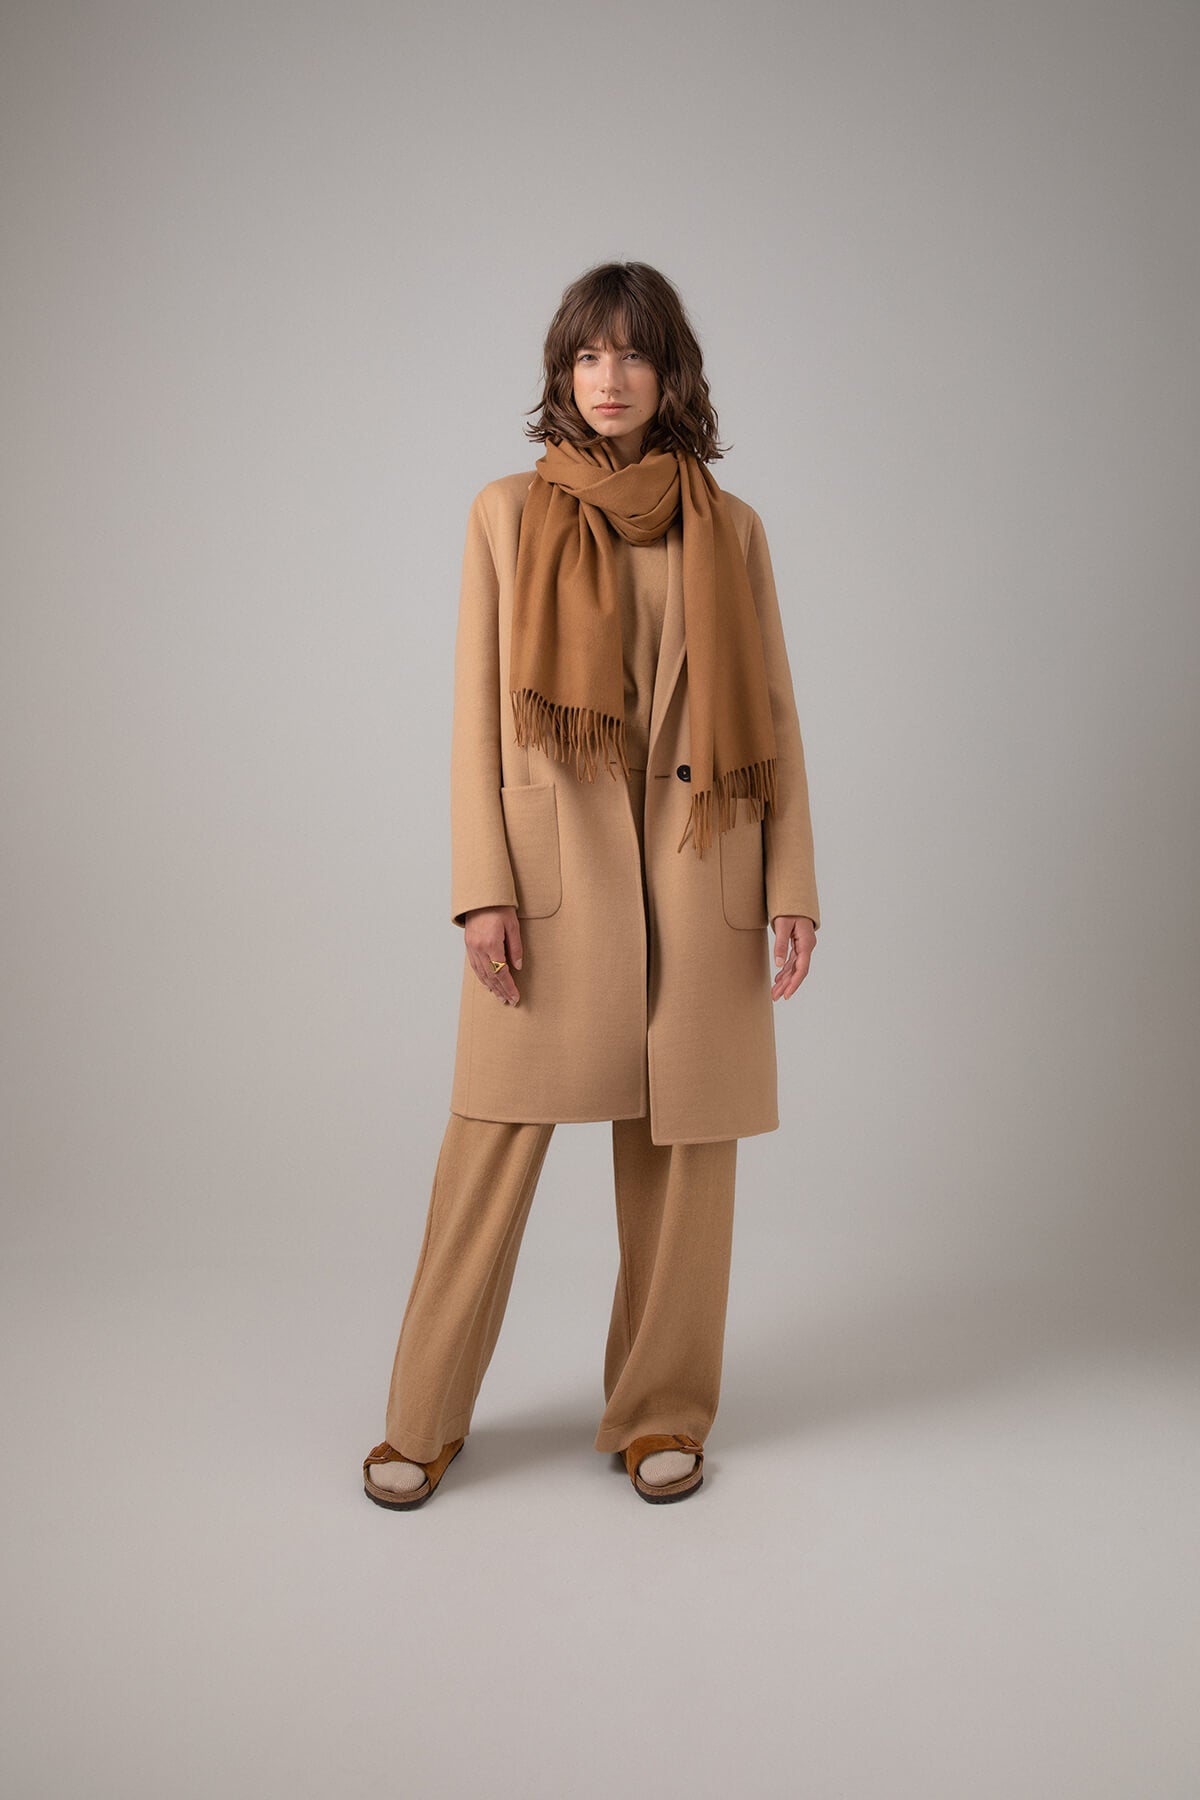 Johnstons of Elgin Pure Vicuña Stole worn with a Camel Cashmere Coat on a grey background WR000024SB3022N/A